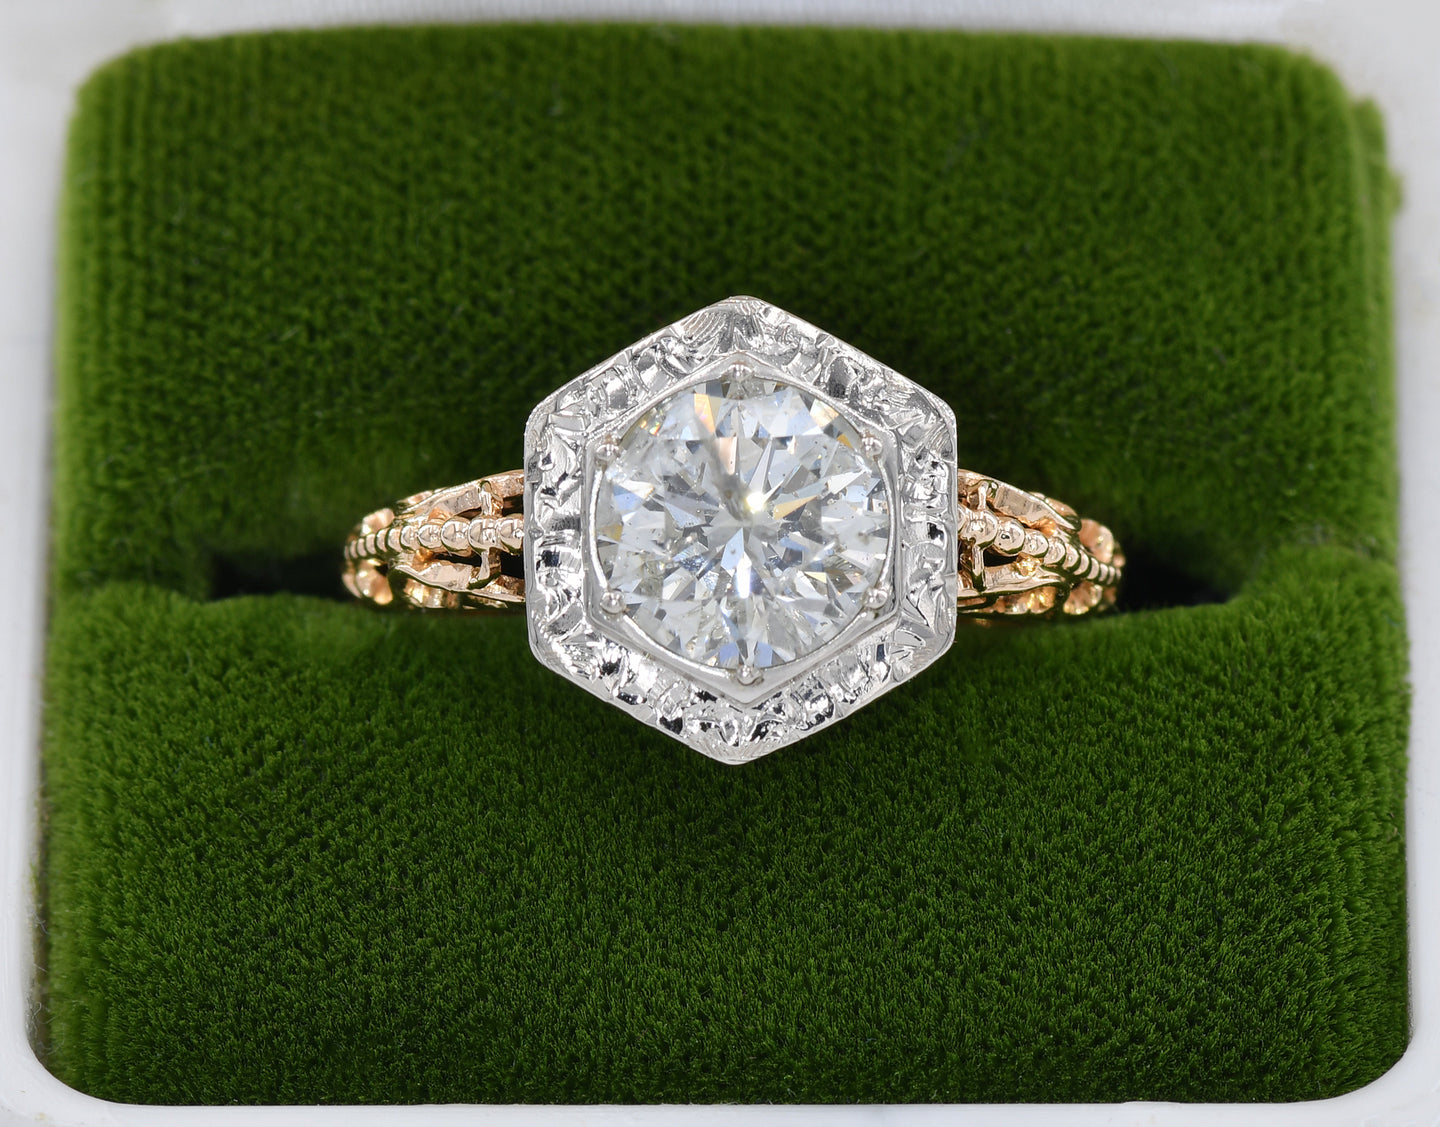 Antique 14K yellow and white gold ring set with a round brilliant cut diamond.